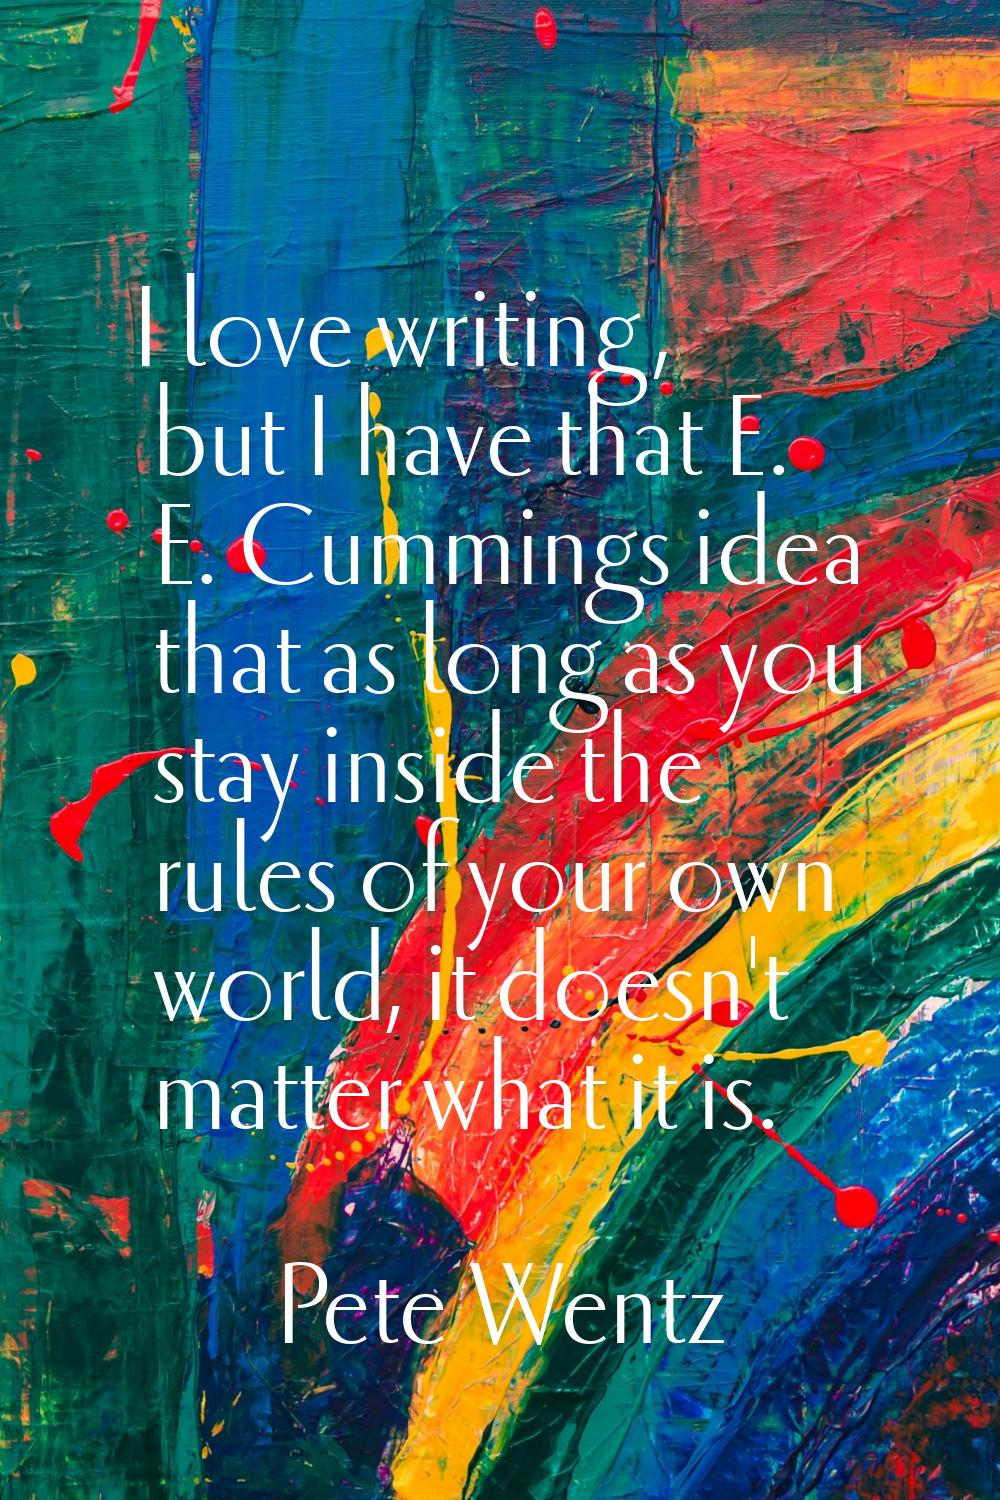 I love writing, but I have that E. E. Cummings idea that as long as you stay inside the rules of yo